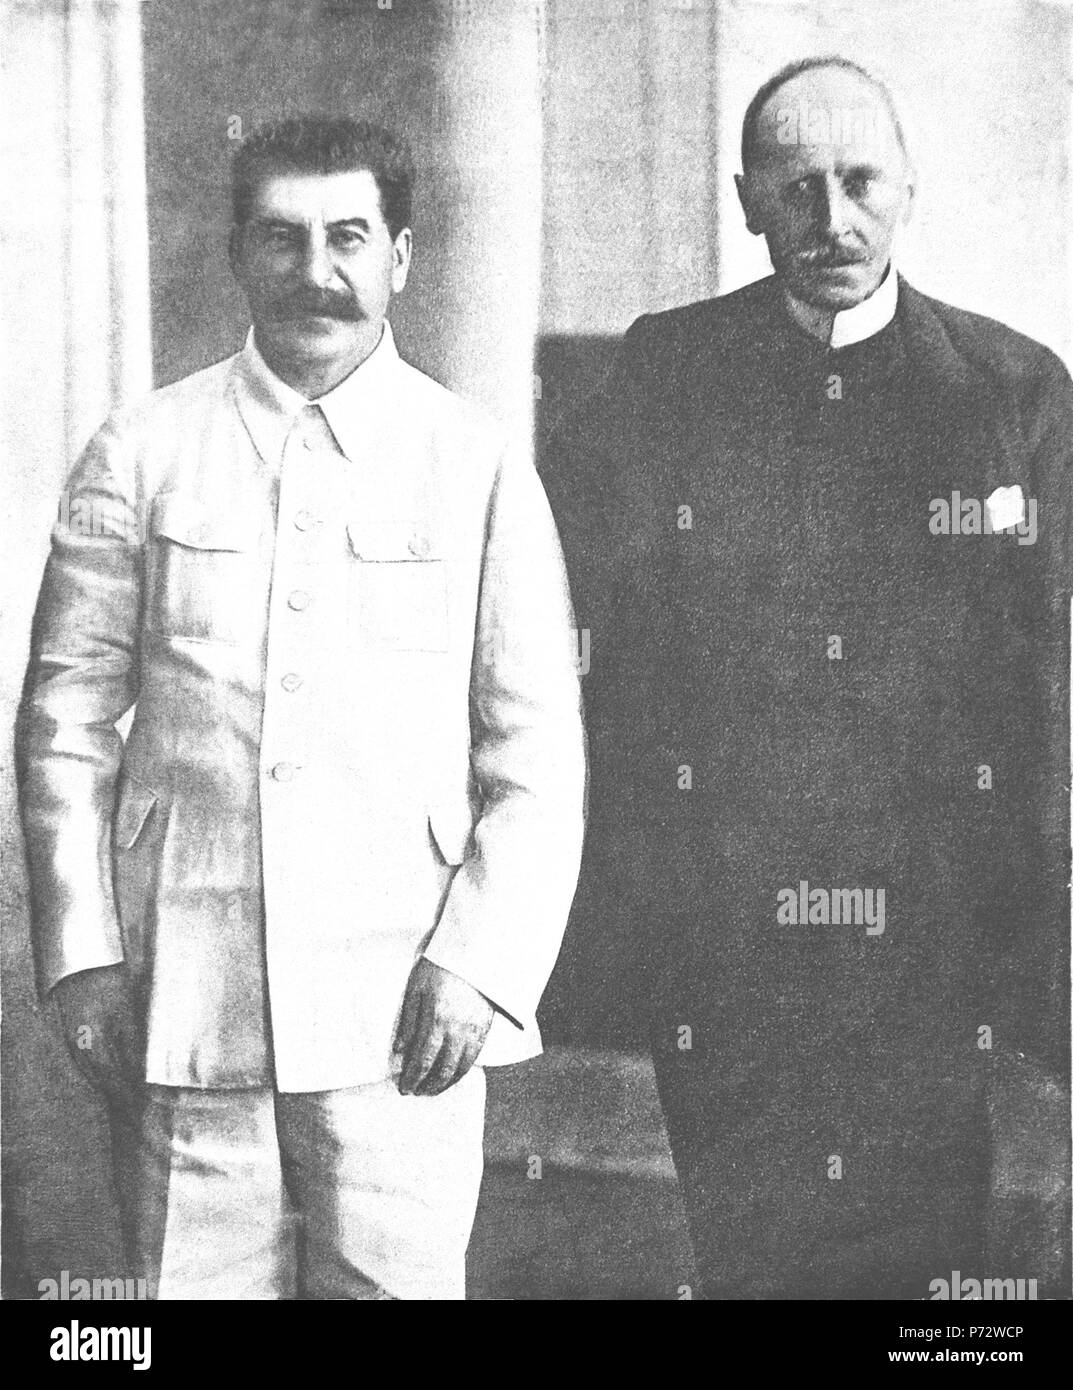 English: Photo date: Jun 28 1935. Joseph Stalin, General Secretary of the Communist Party and French author and Nobel laureate Romain Rolland. Romain Rolland will write to Stalin in 1937 seeking clemency for Nikolai Bukharin, arguing that 'an intellect like that of Bukharin is a treasure for his country.' He compared Bukharin's situation to that of the great chemist Antoine Lavoisier who was guillotined during the French Revolution: 'We in France, the most ardent revolutionaries... still profoundly grieve and regret what we did. ... I beg you to show clemency. 30 July 1935 4 Joseph Stalin and  Stock Photo